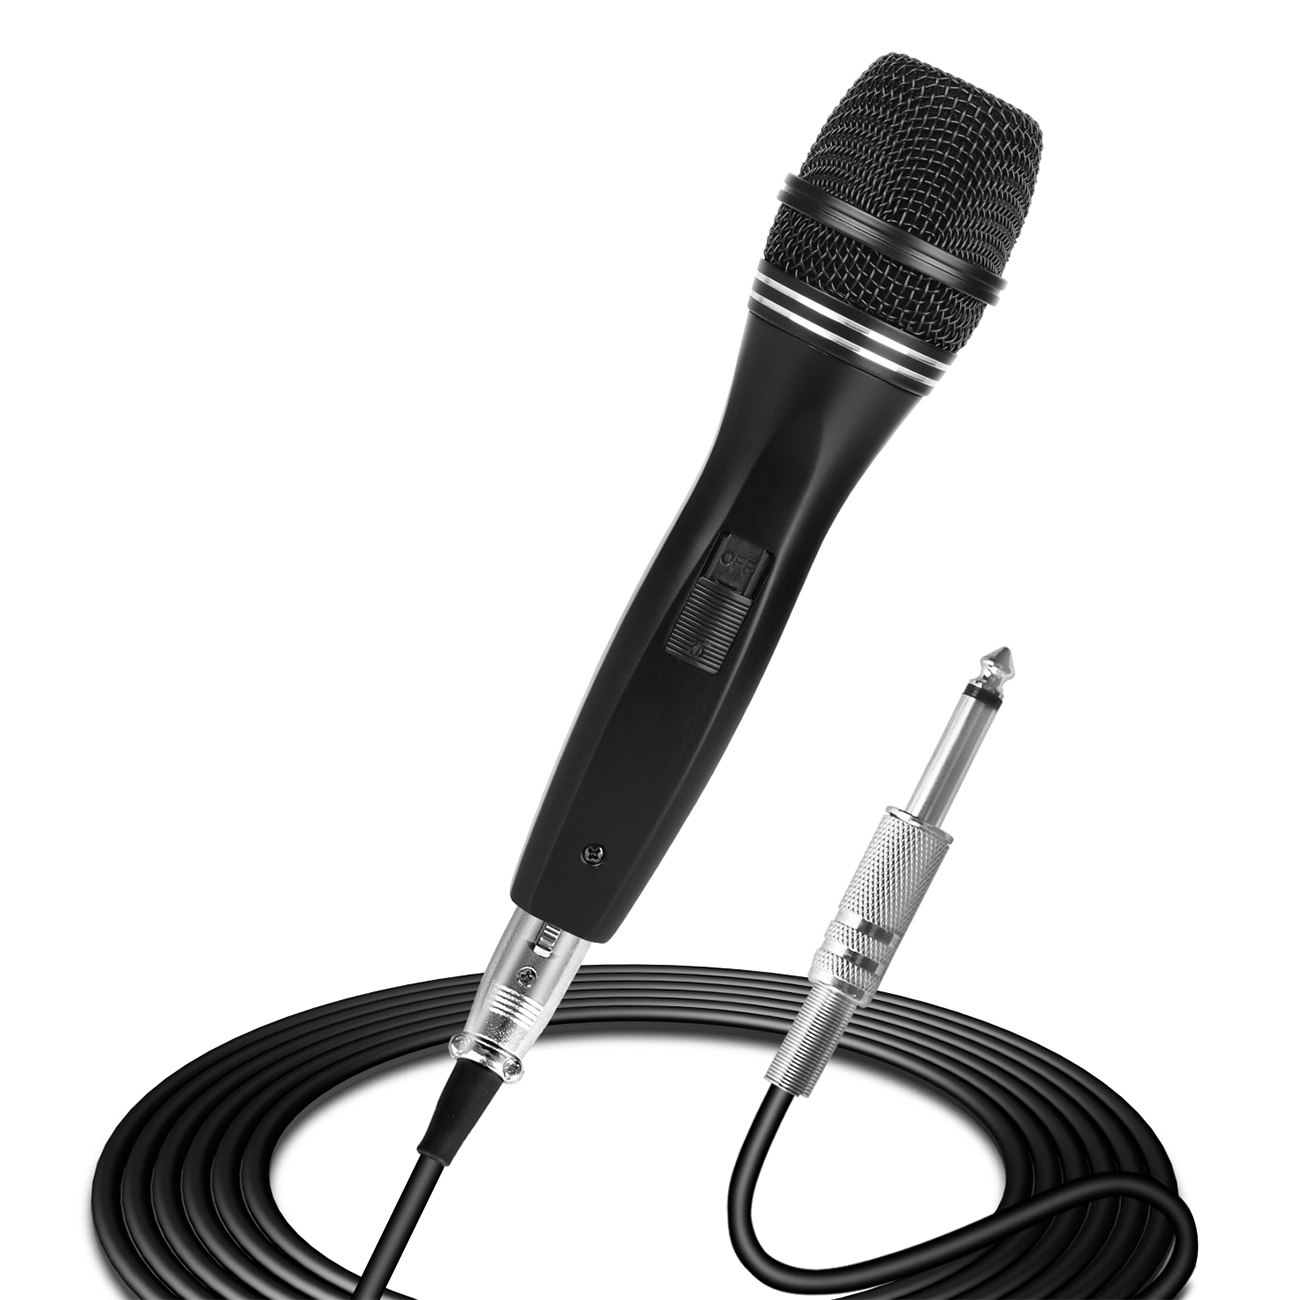 Wired Handheld Microphone with XLR Connector